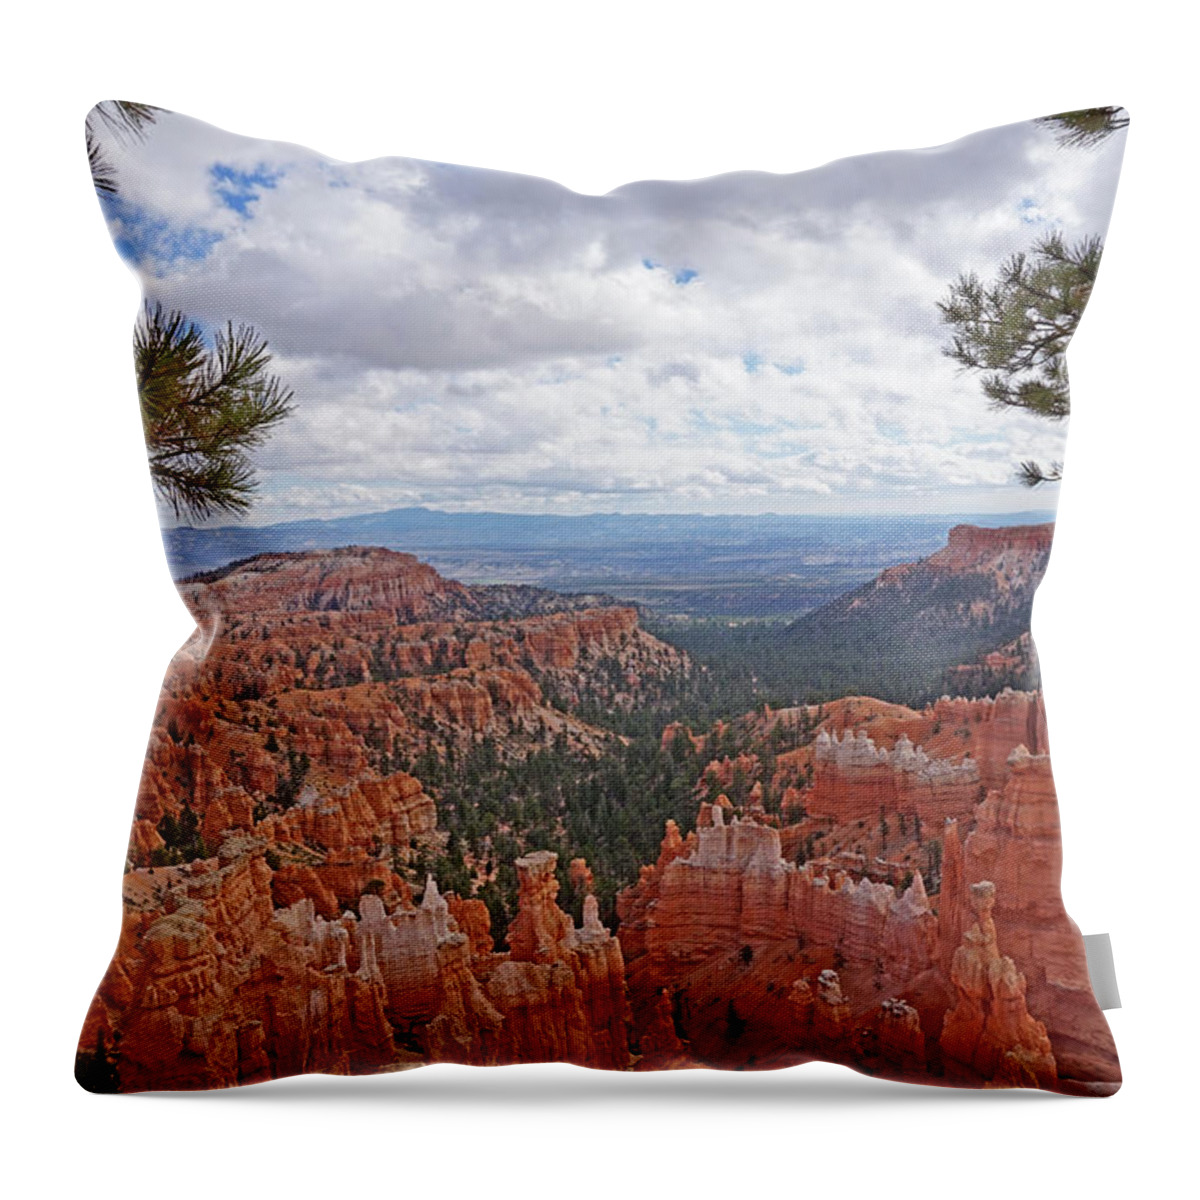 Bryce Canyon National Park Throw Pillow featuring the photograph Bryce Canyon National Park - Panorama with Branches by Yvonne Jasinski